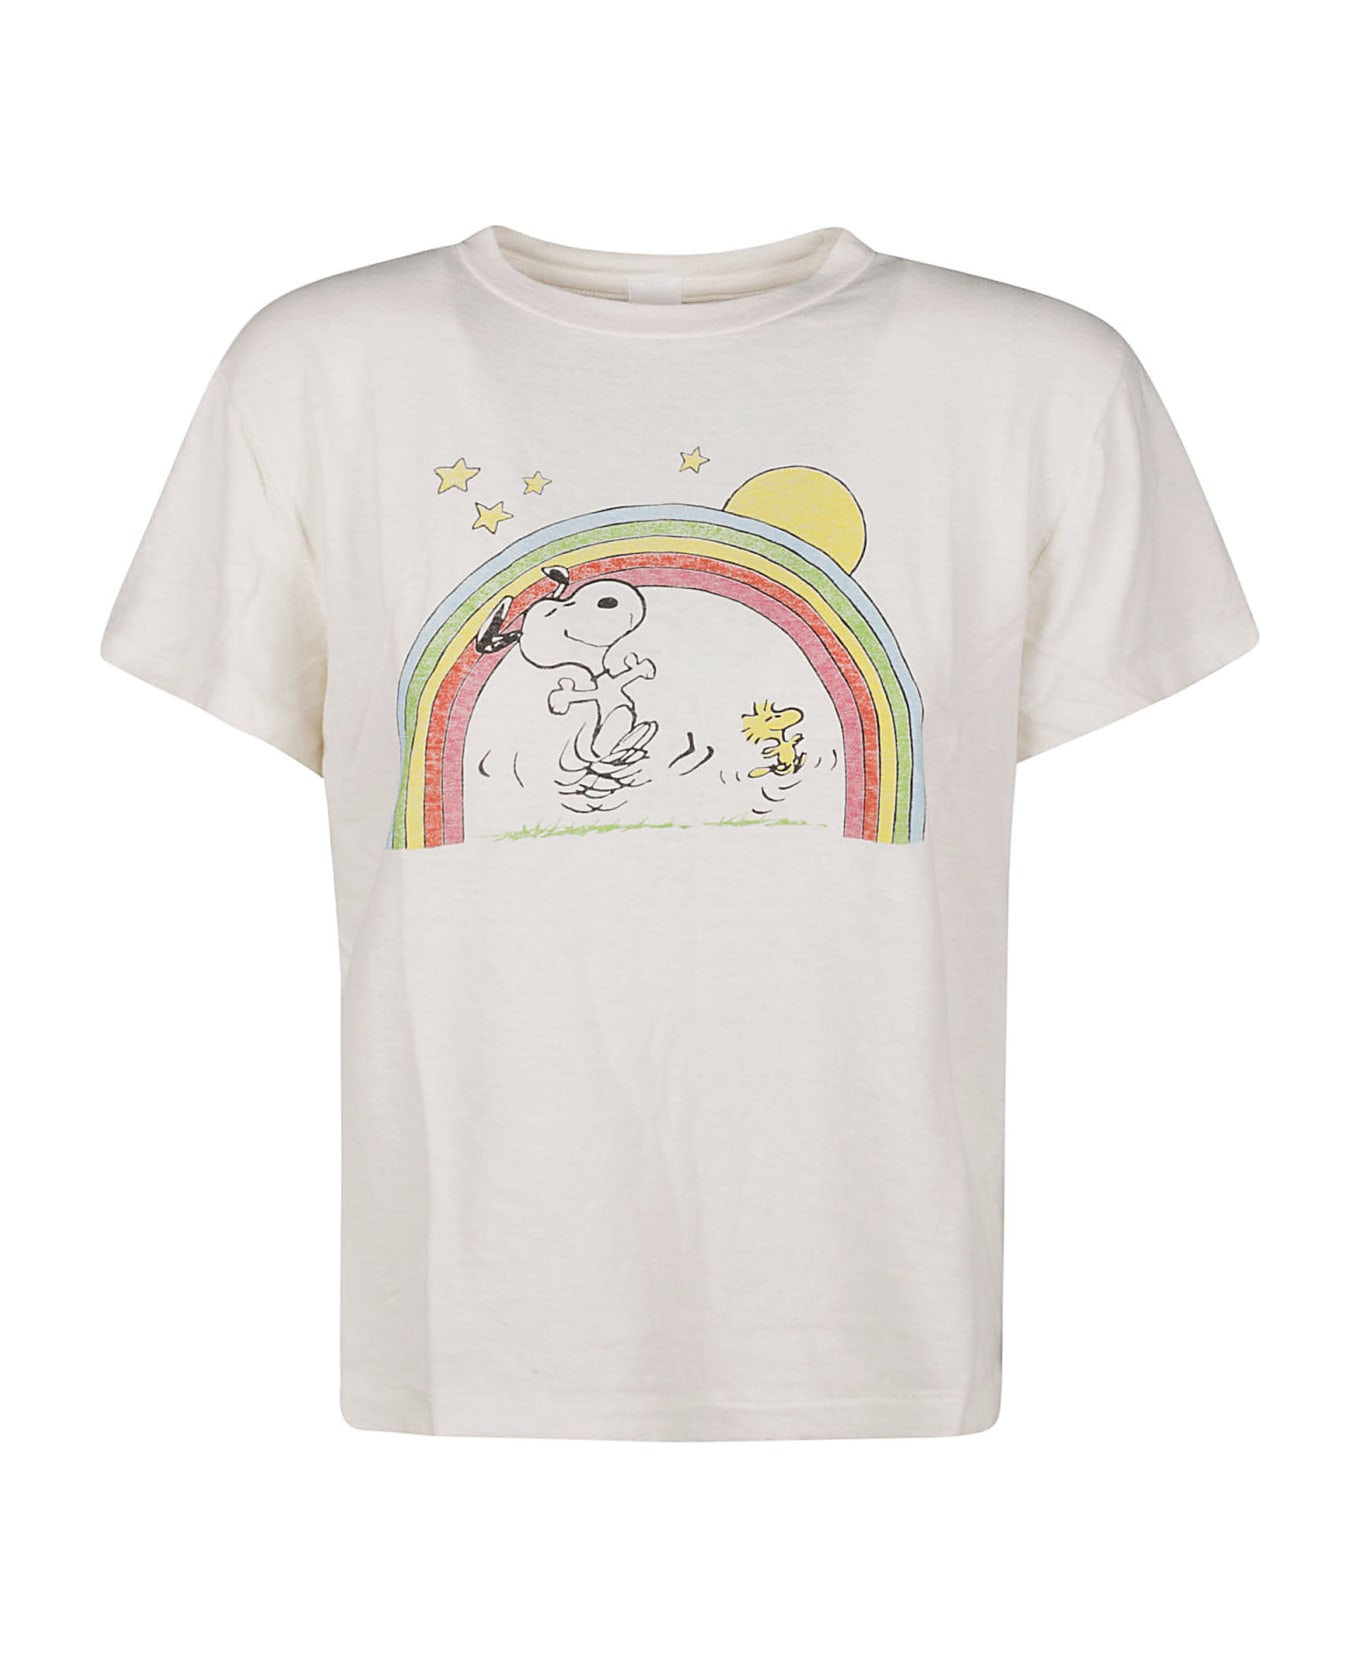 RE/DONE Classic Peanuts Rainbow T-shirt - Vintage White